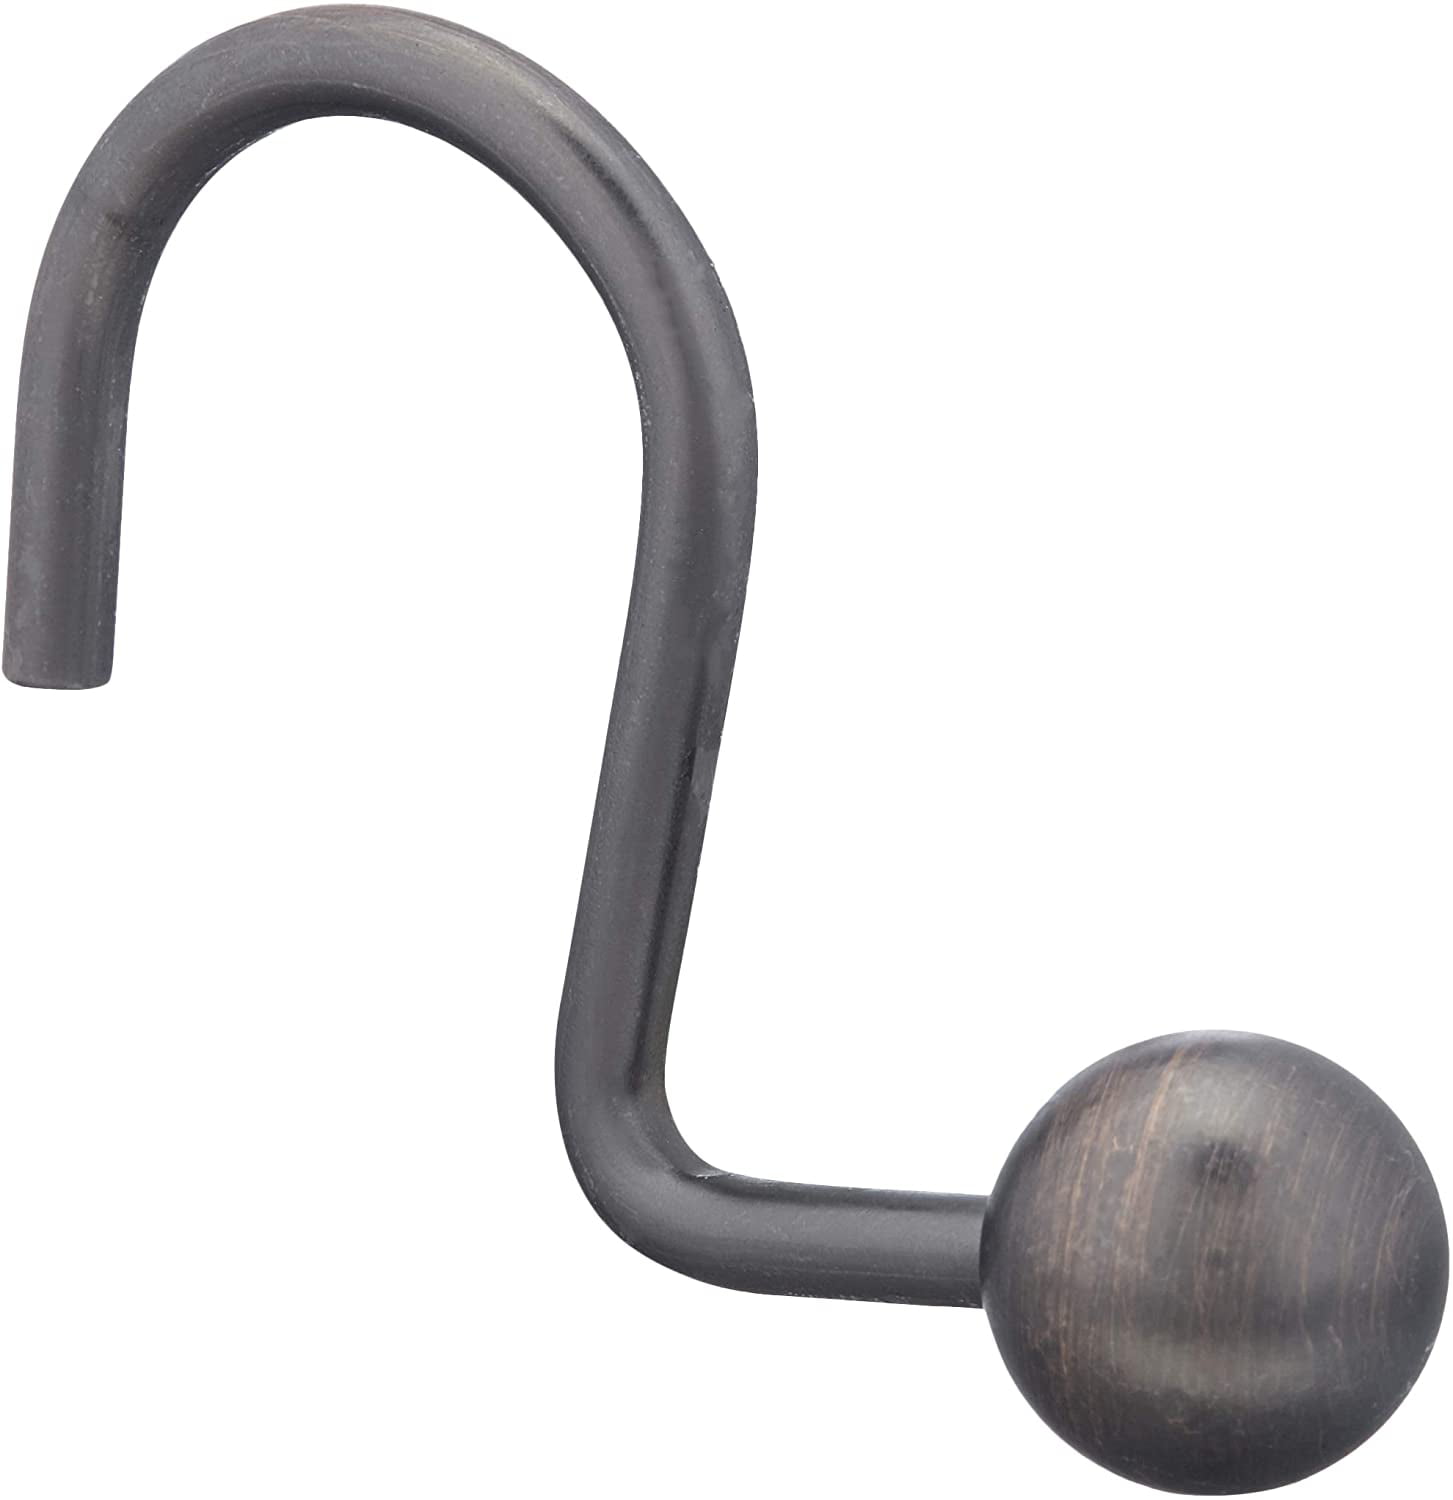 Details about   S Shaped Oil Rubbed Bronze heavy weight metal shower curtain hooks 